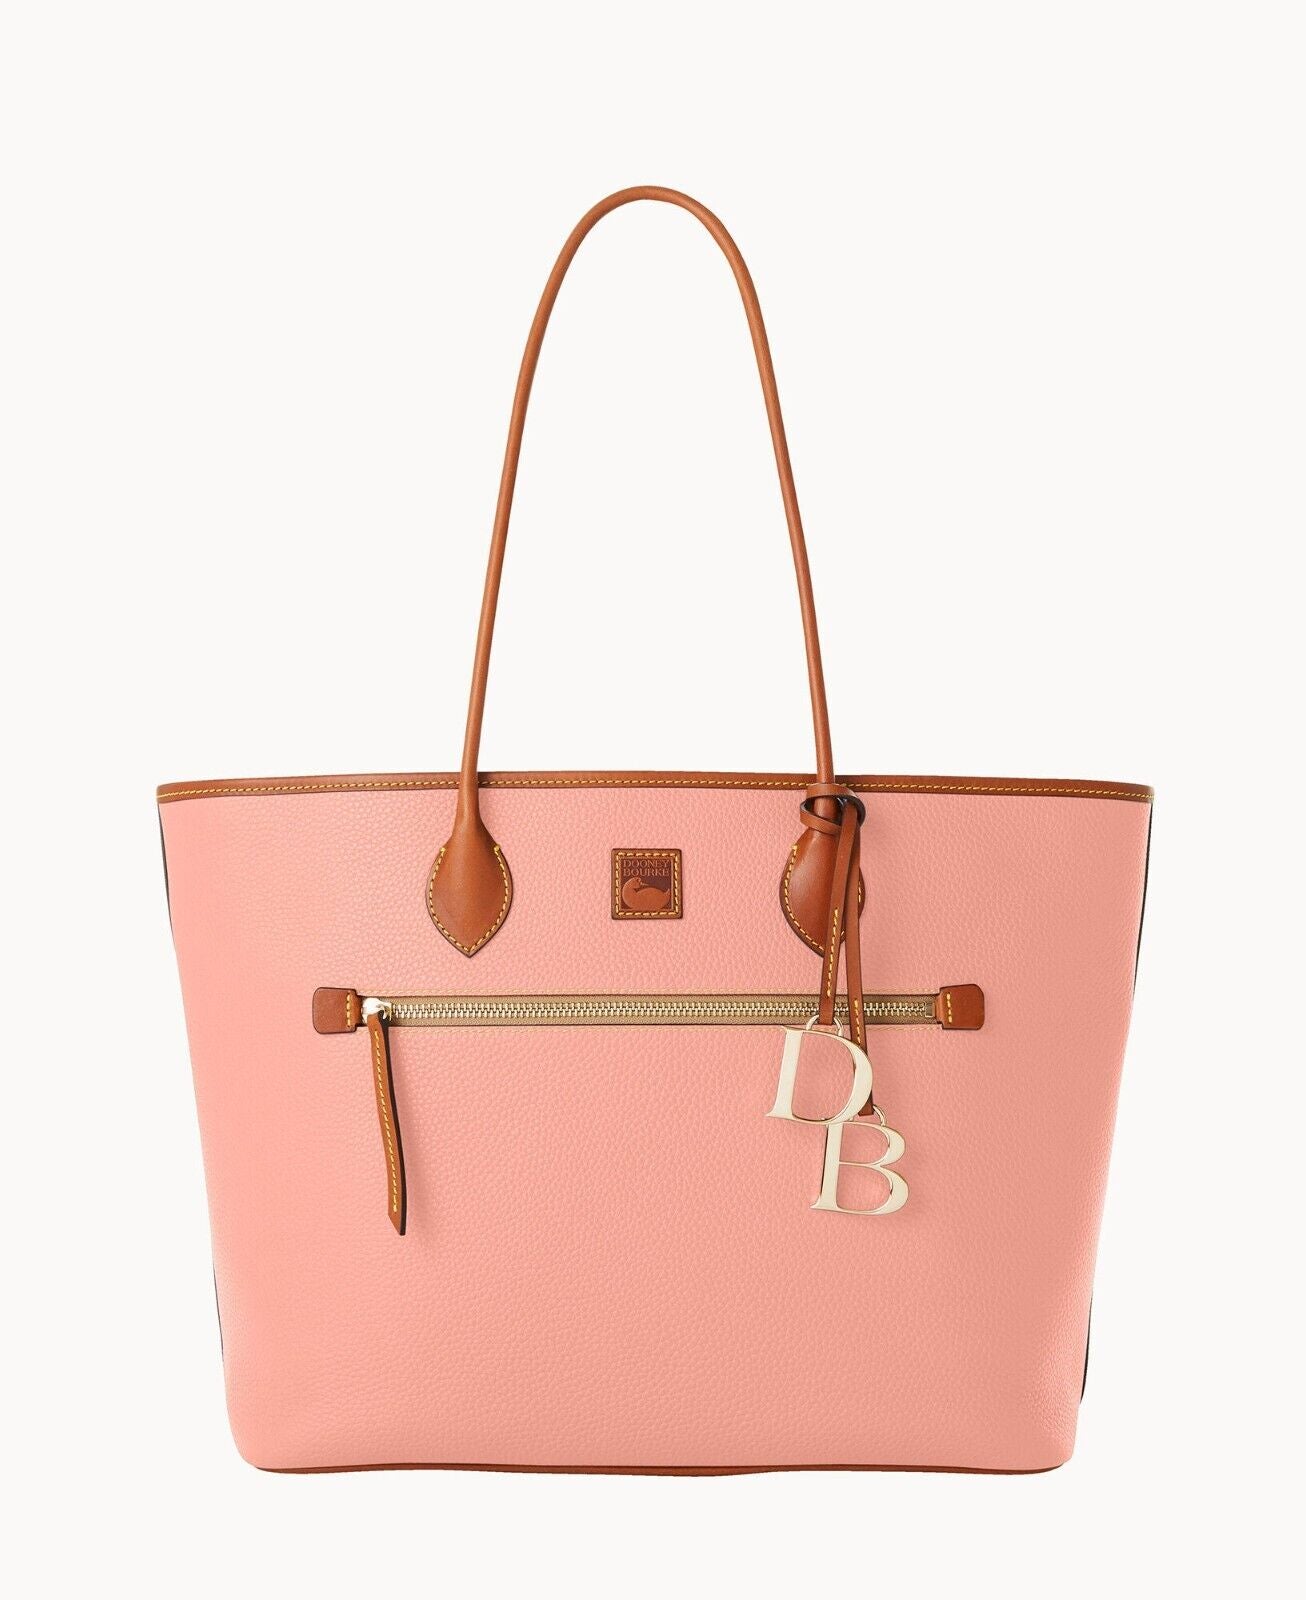 Women's Powder Pink Leather two handle bag